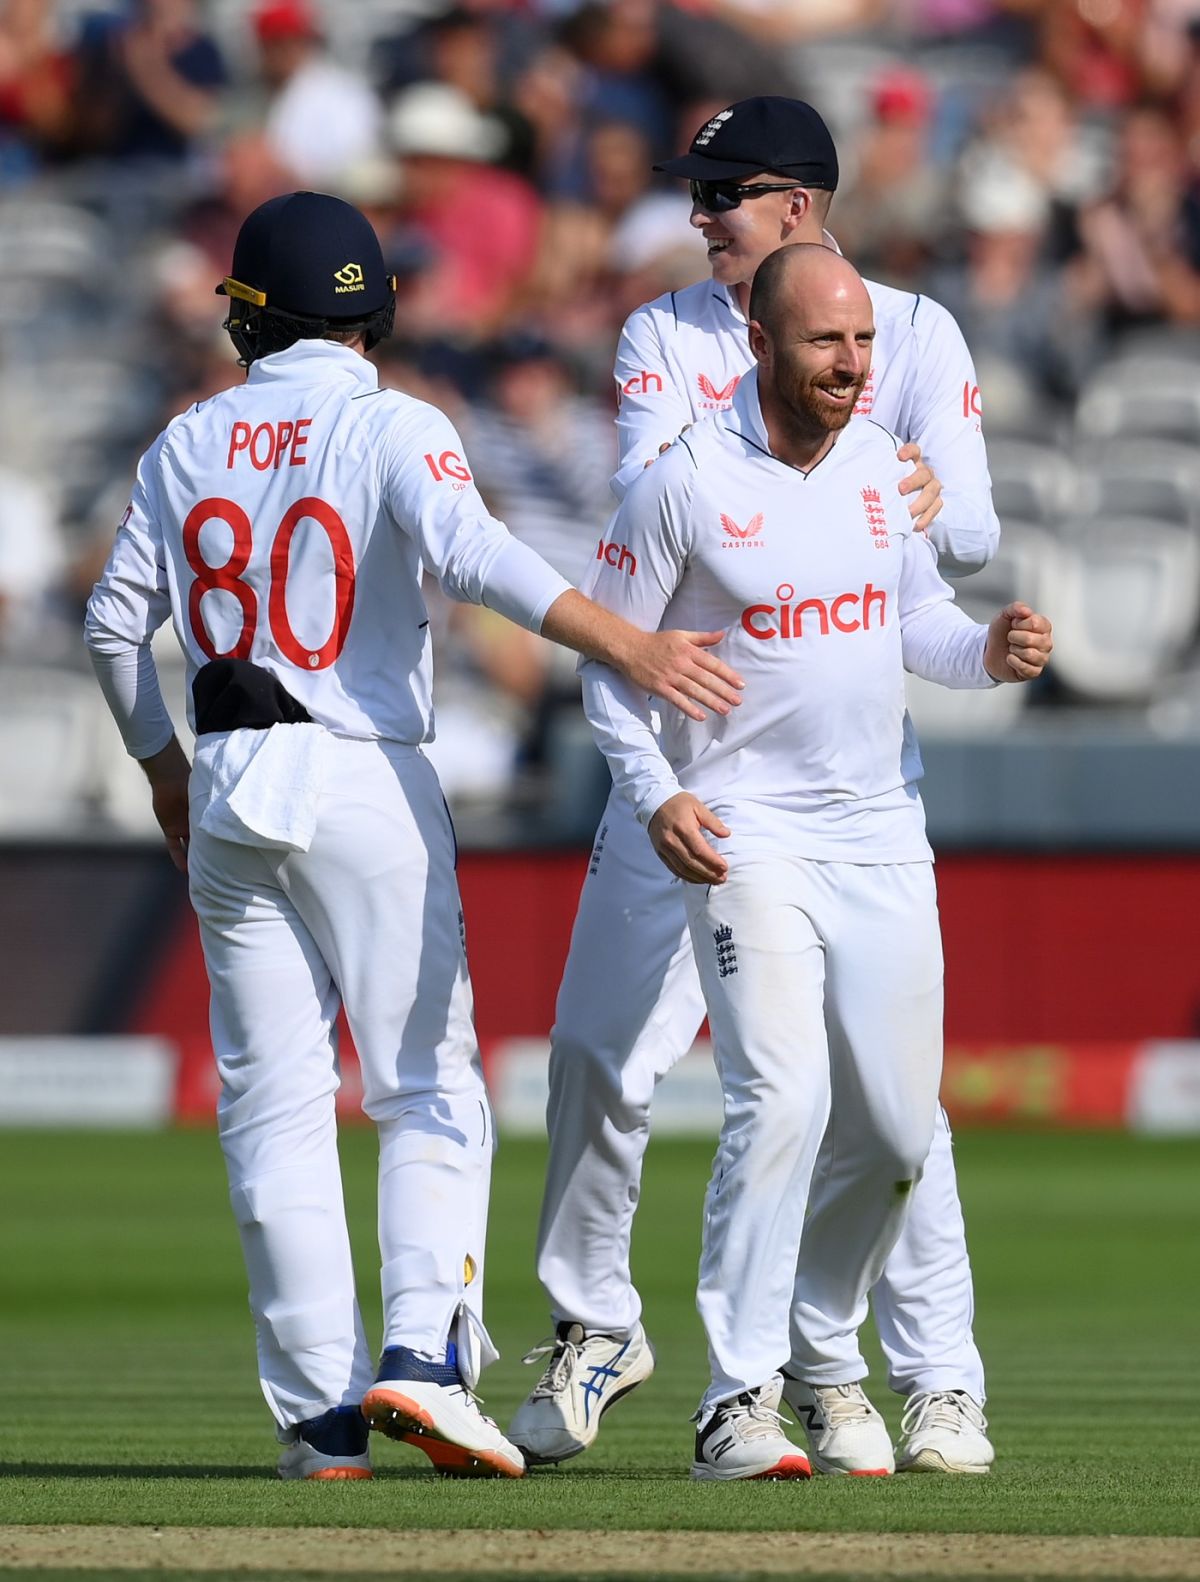 Jack Leach struck with his first ball after tea to remove Aiden Markram, England vs South Africa, 1st LV= Insurance Test, Lord's, day 2, August 18, 2022